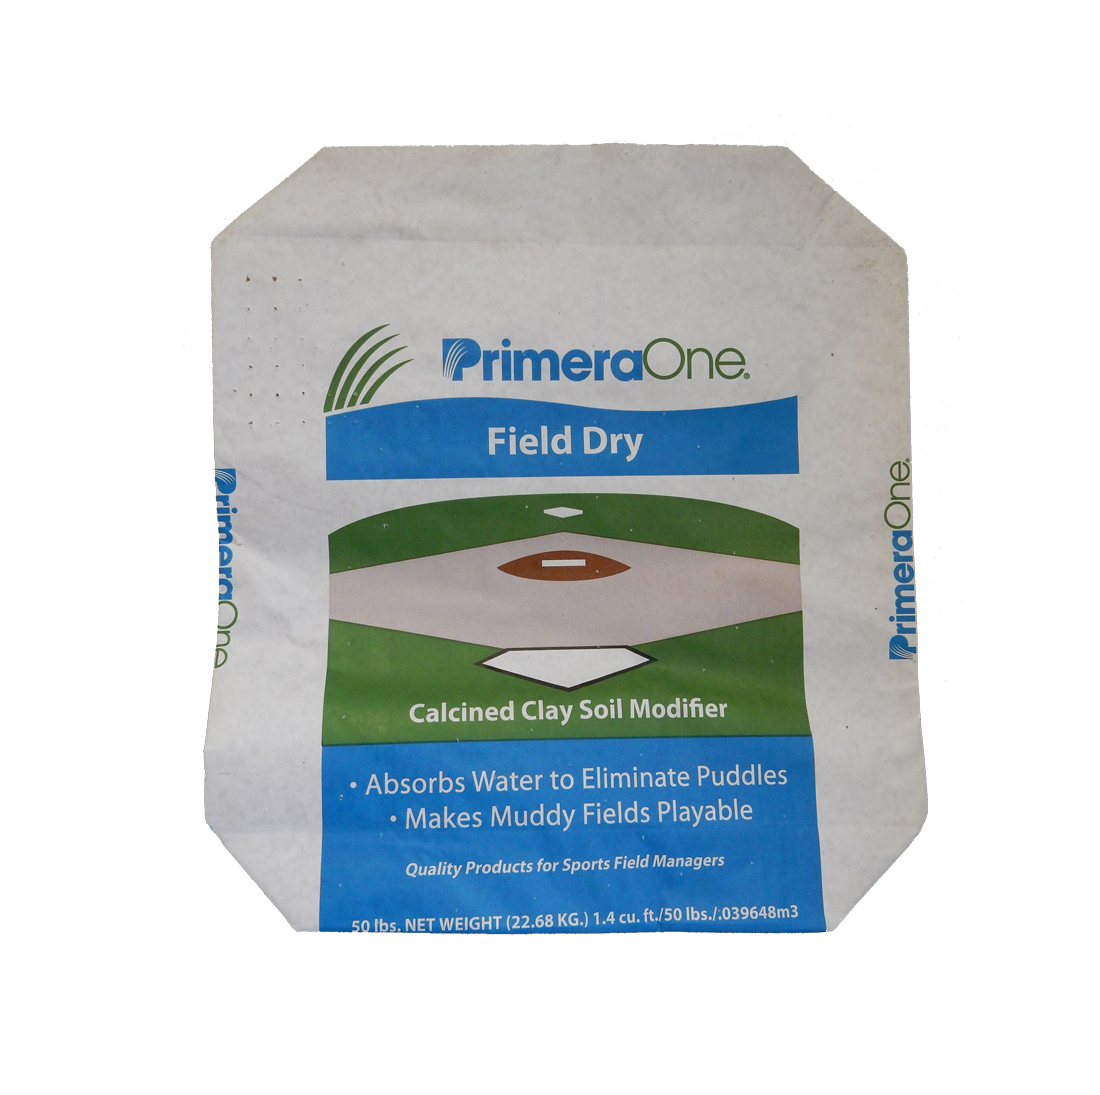 Primera One Field Dry 50 lb Bag - 40 per pallet - Athletic Field Care